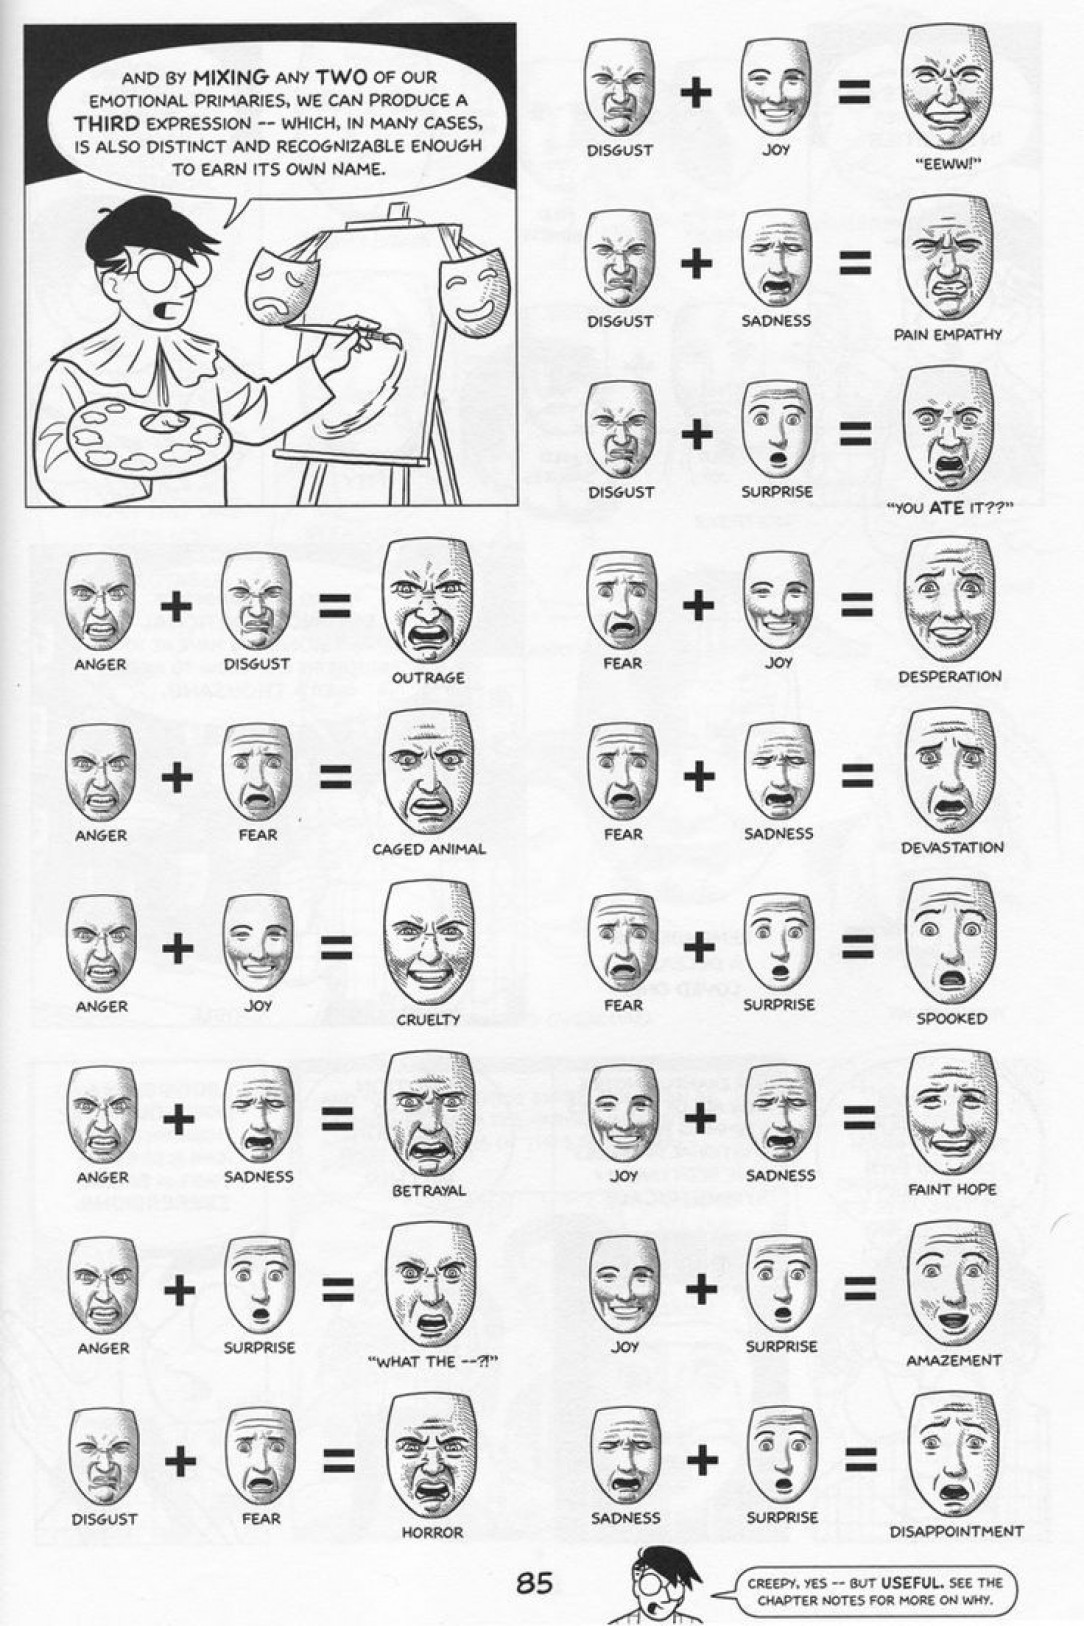 Guide for facial expressions